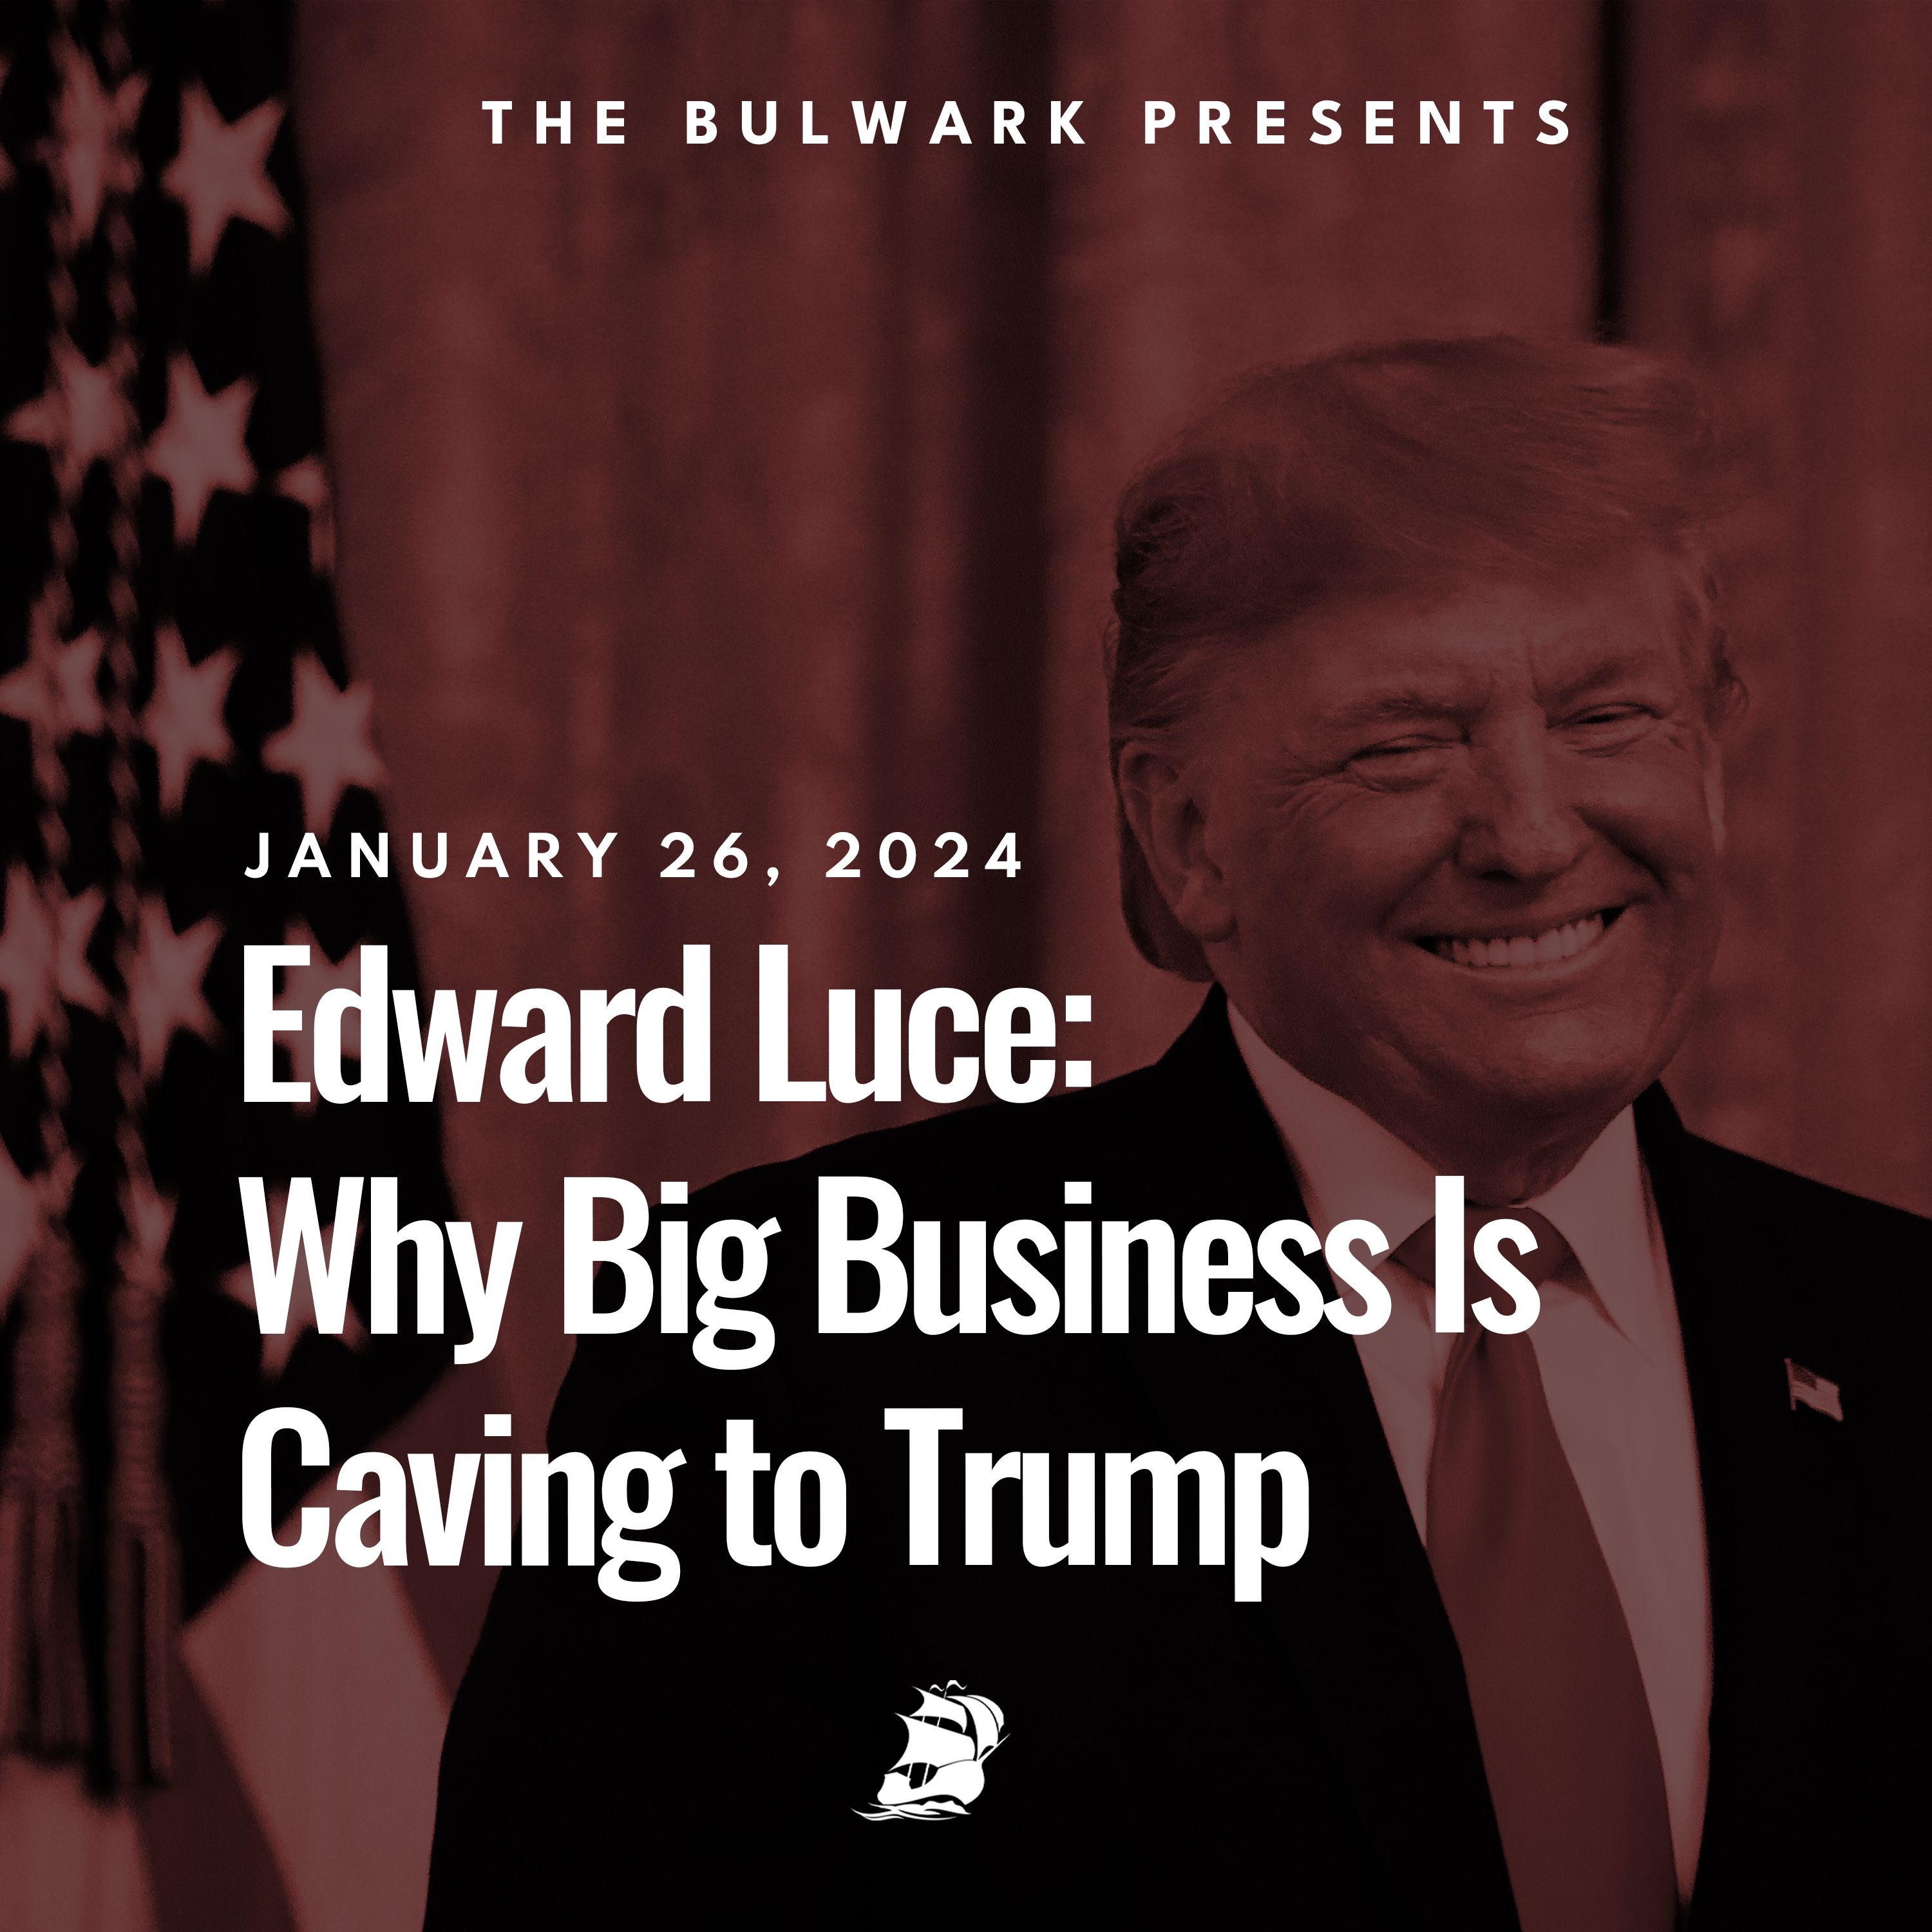 Edward Luce: Why Big Business Is Caving to Trump by The Bulwark Podcast